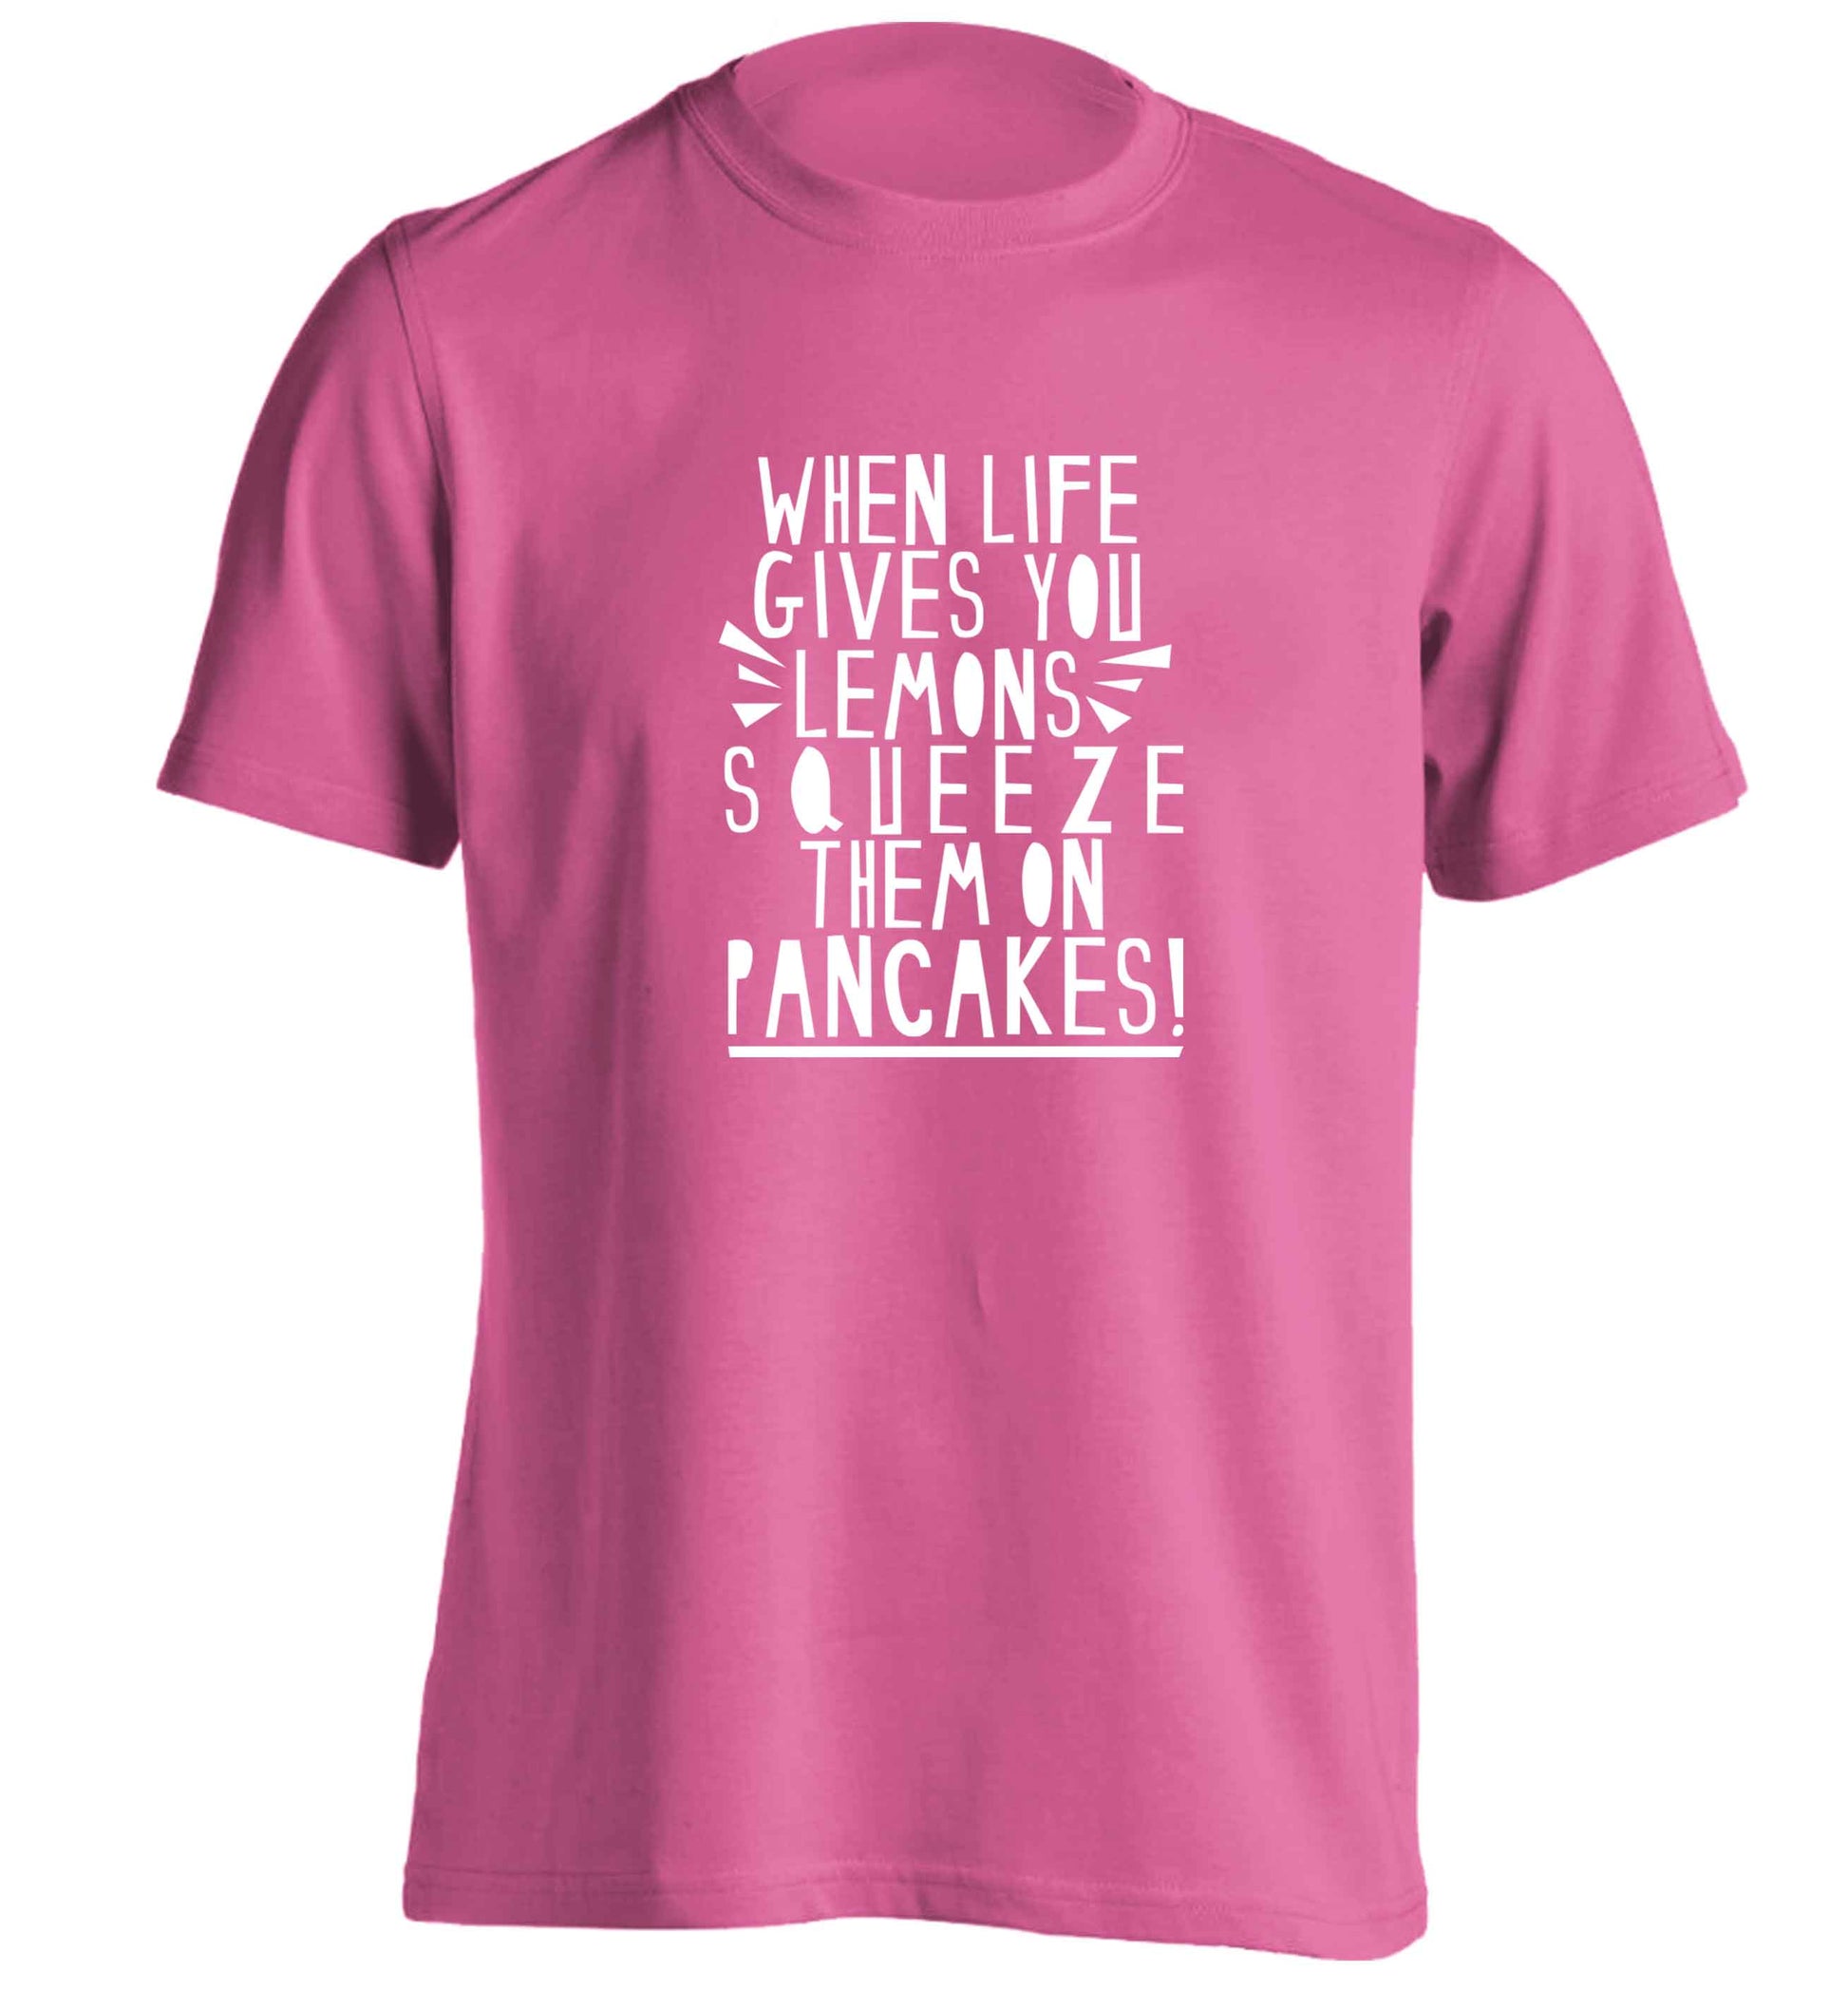 When life gives you lemons squeeze them on pancakes! adults unisex pink Tshirt 2XL